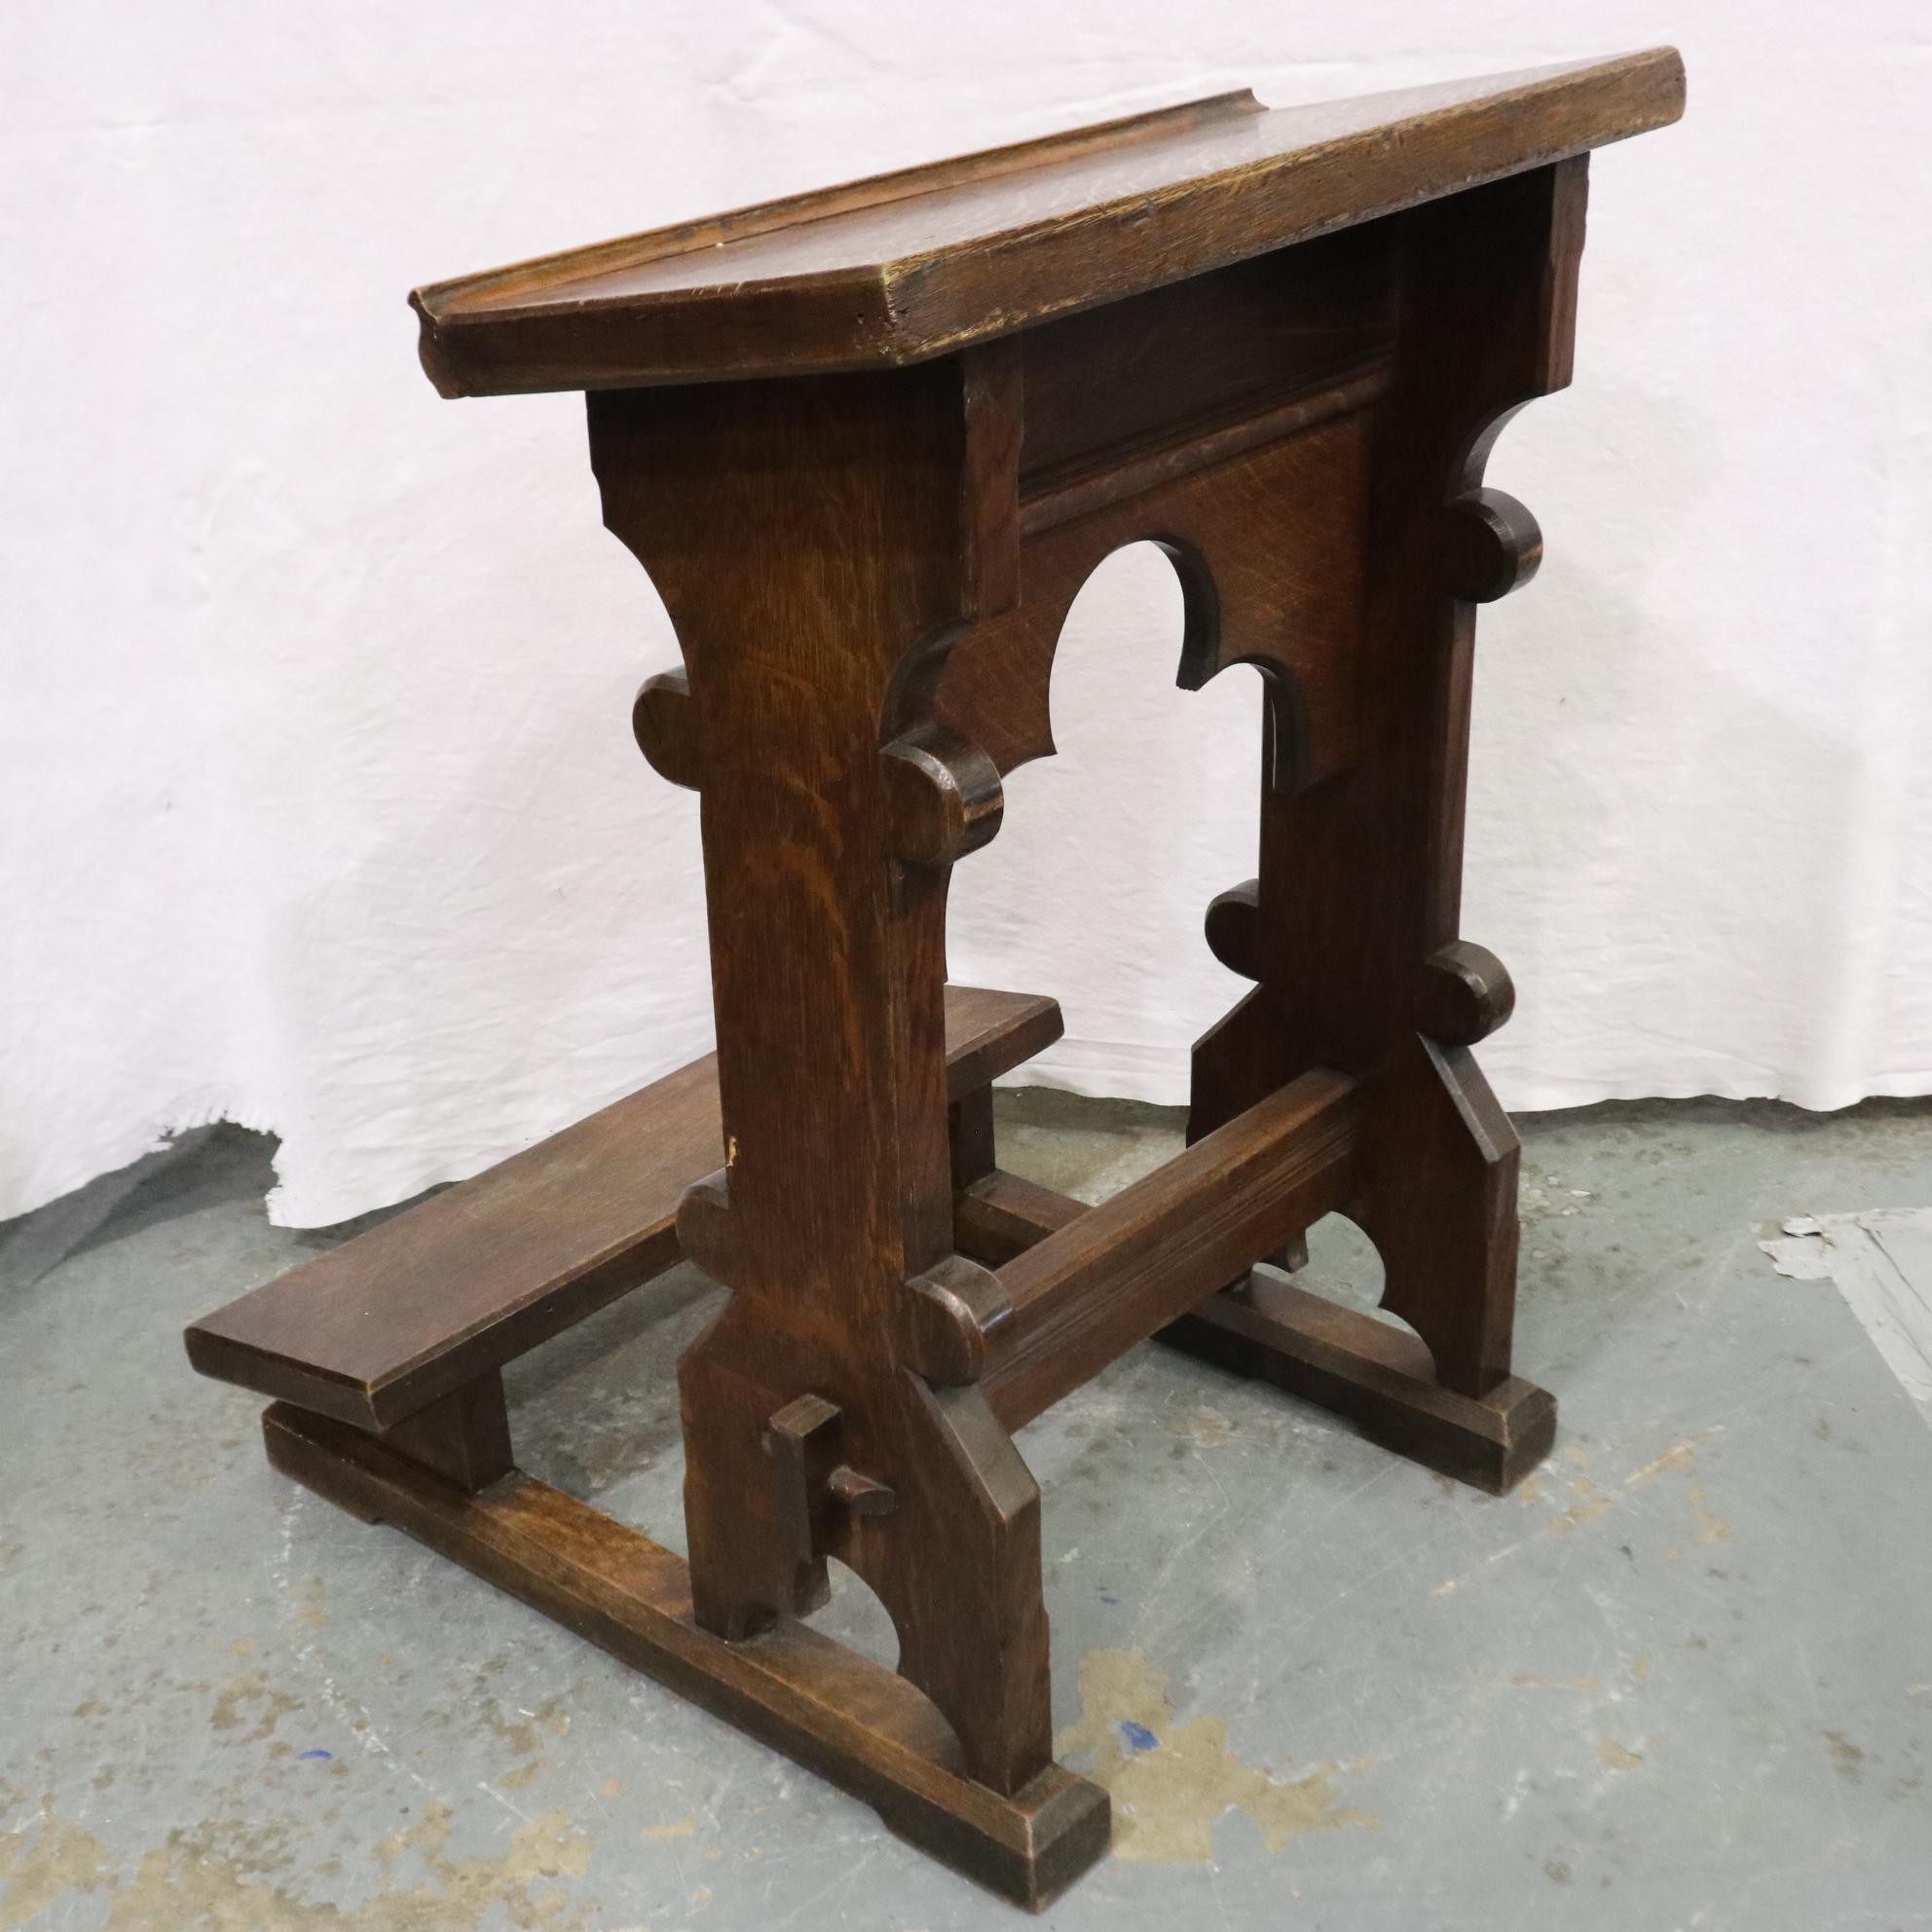 A 19th century oak ecclesiastical kneeler with book rest, 60 x 60 x 84 cm H. Not available for in- - Image 2 of 2